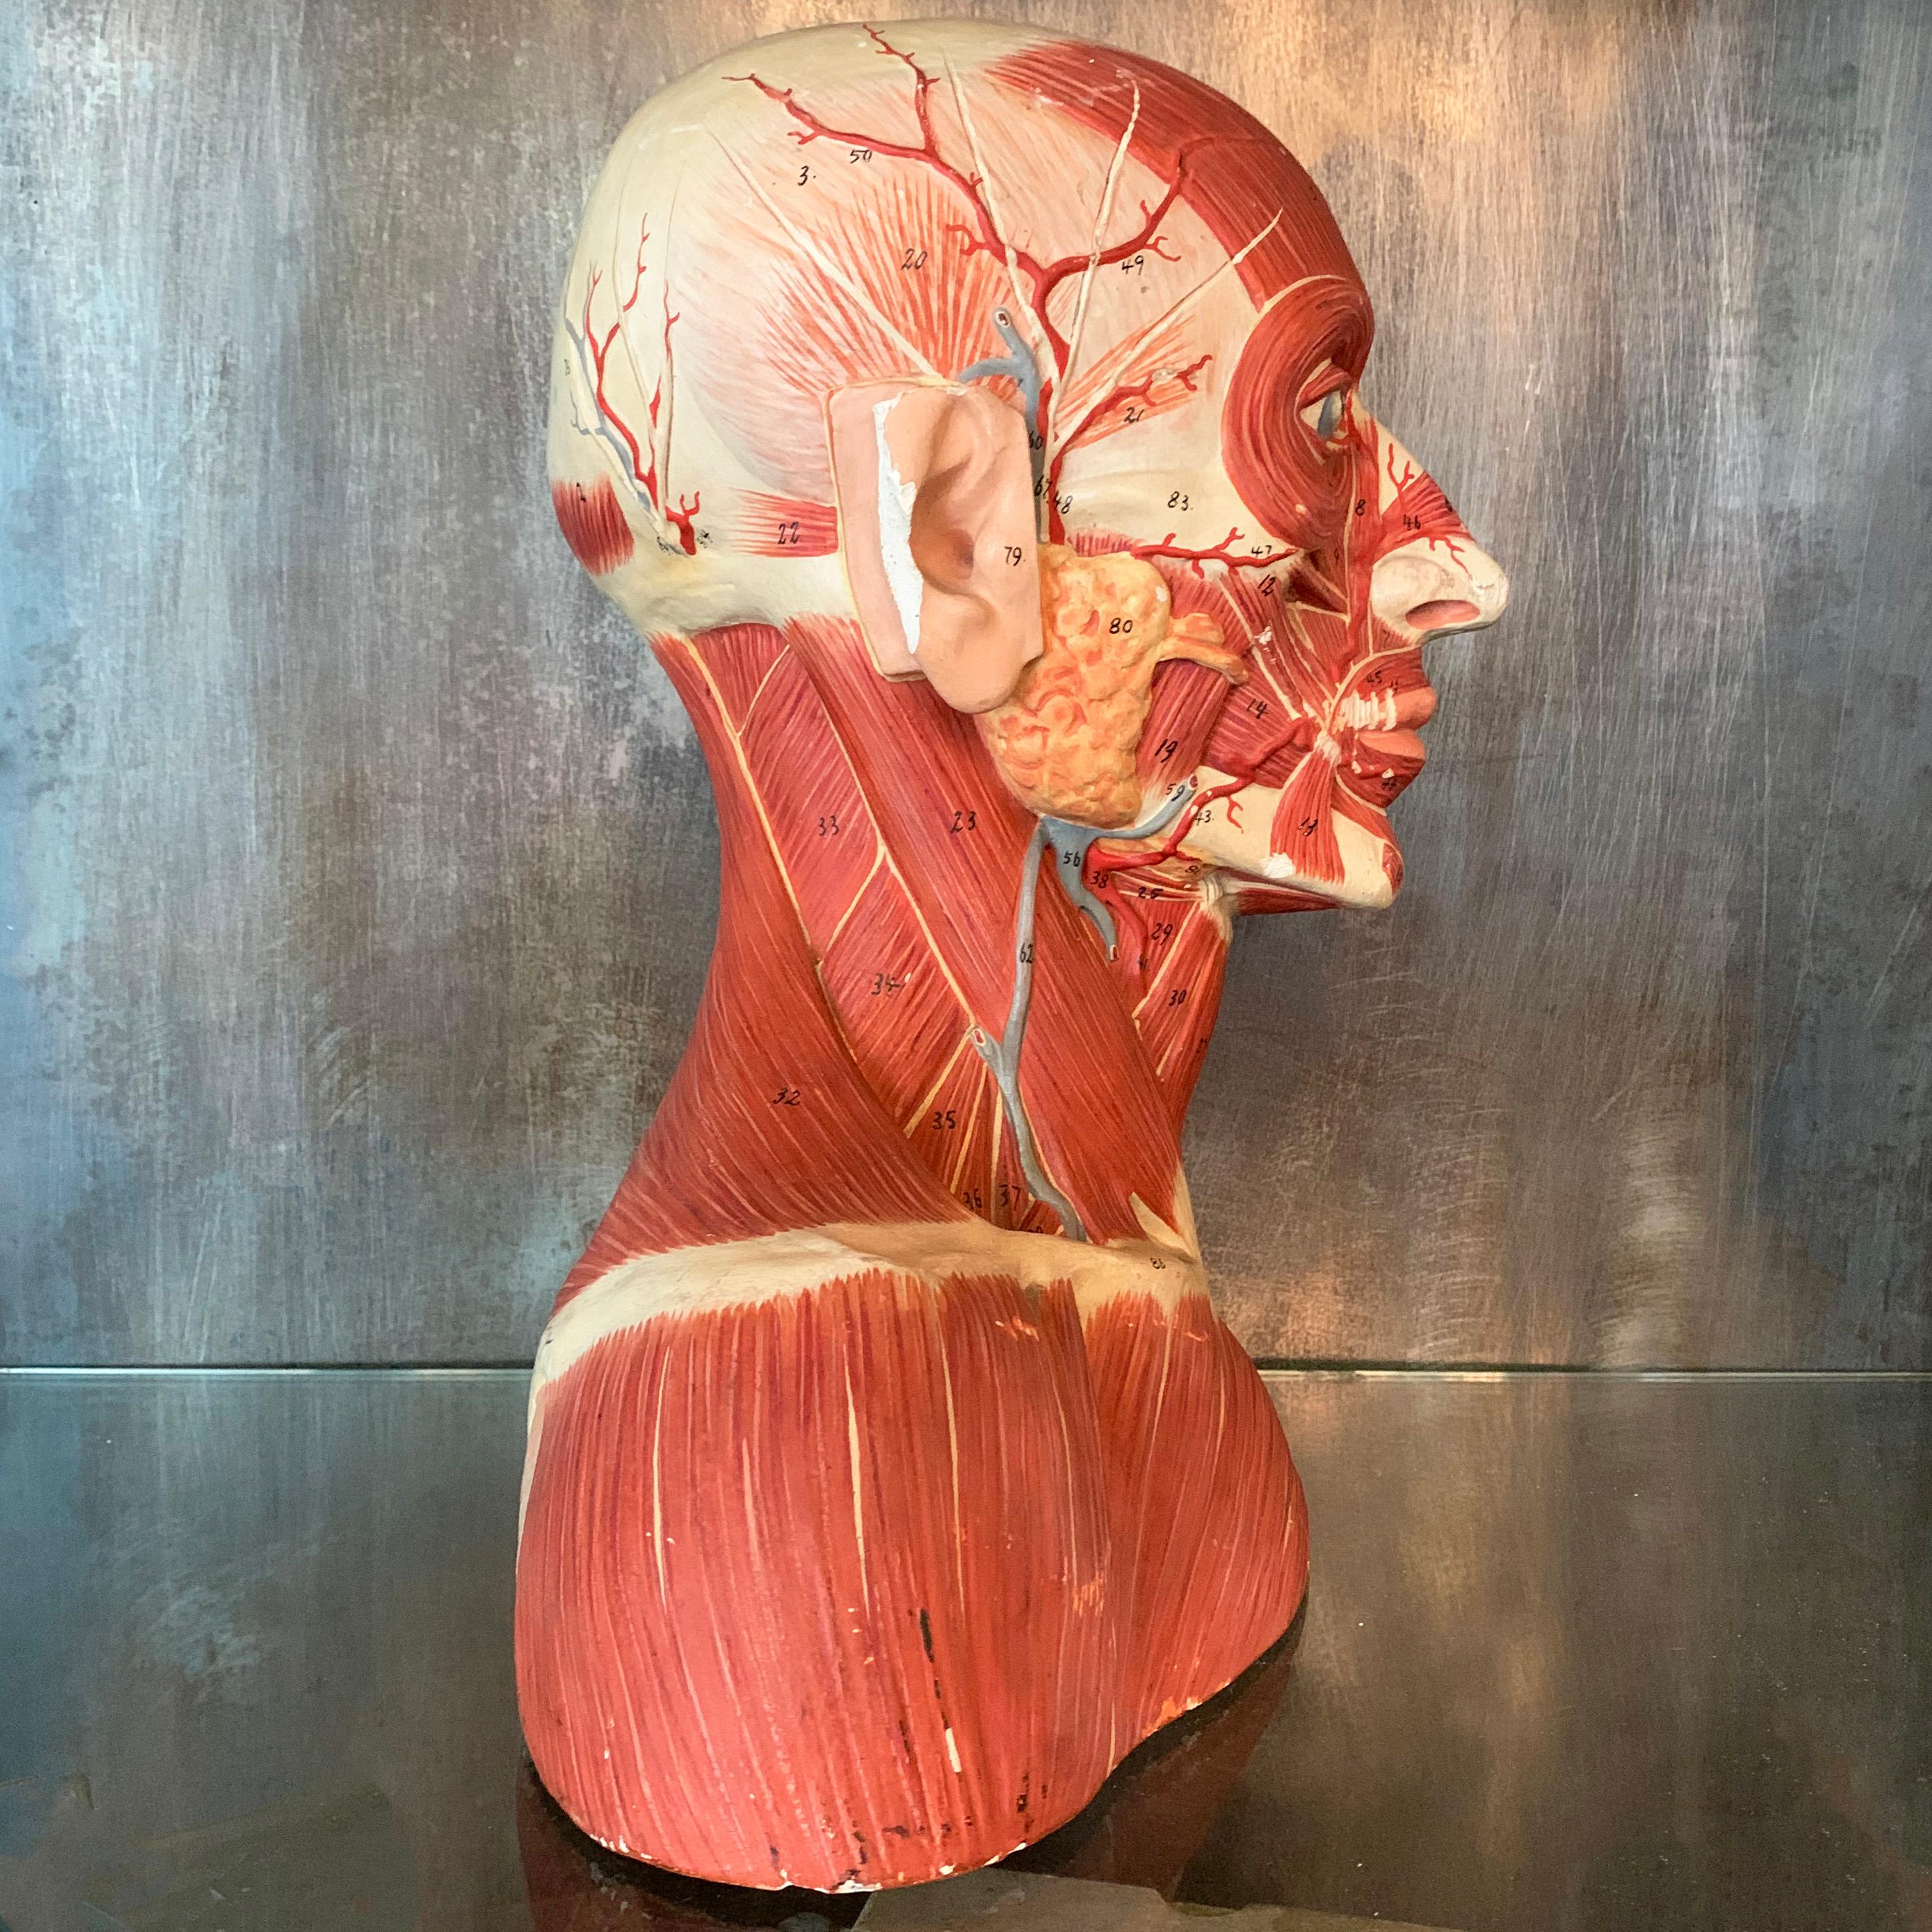 German, anatomical, plaster model of a cross-section of a bust, depicting the muscular and circulatory systems.